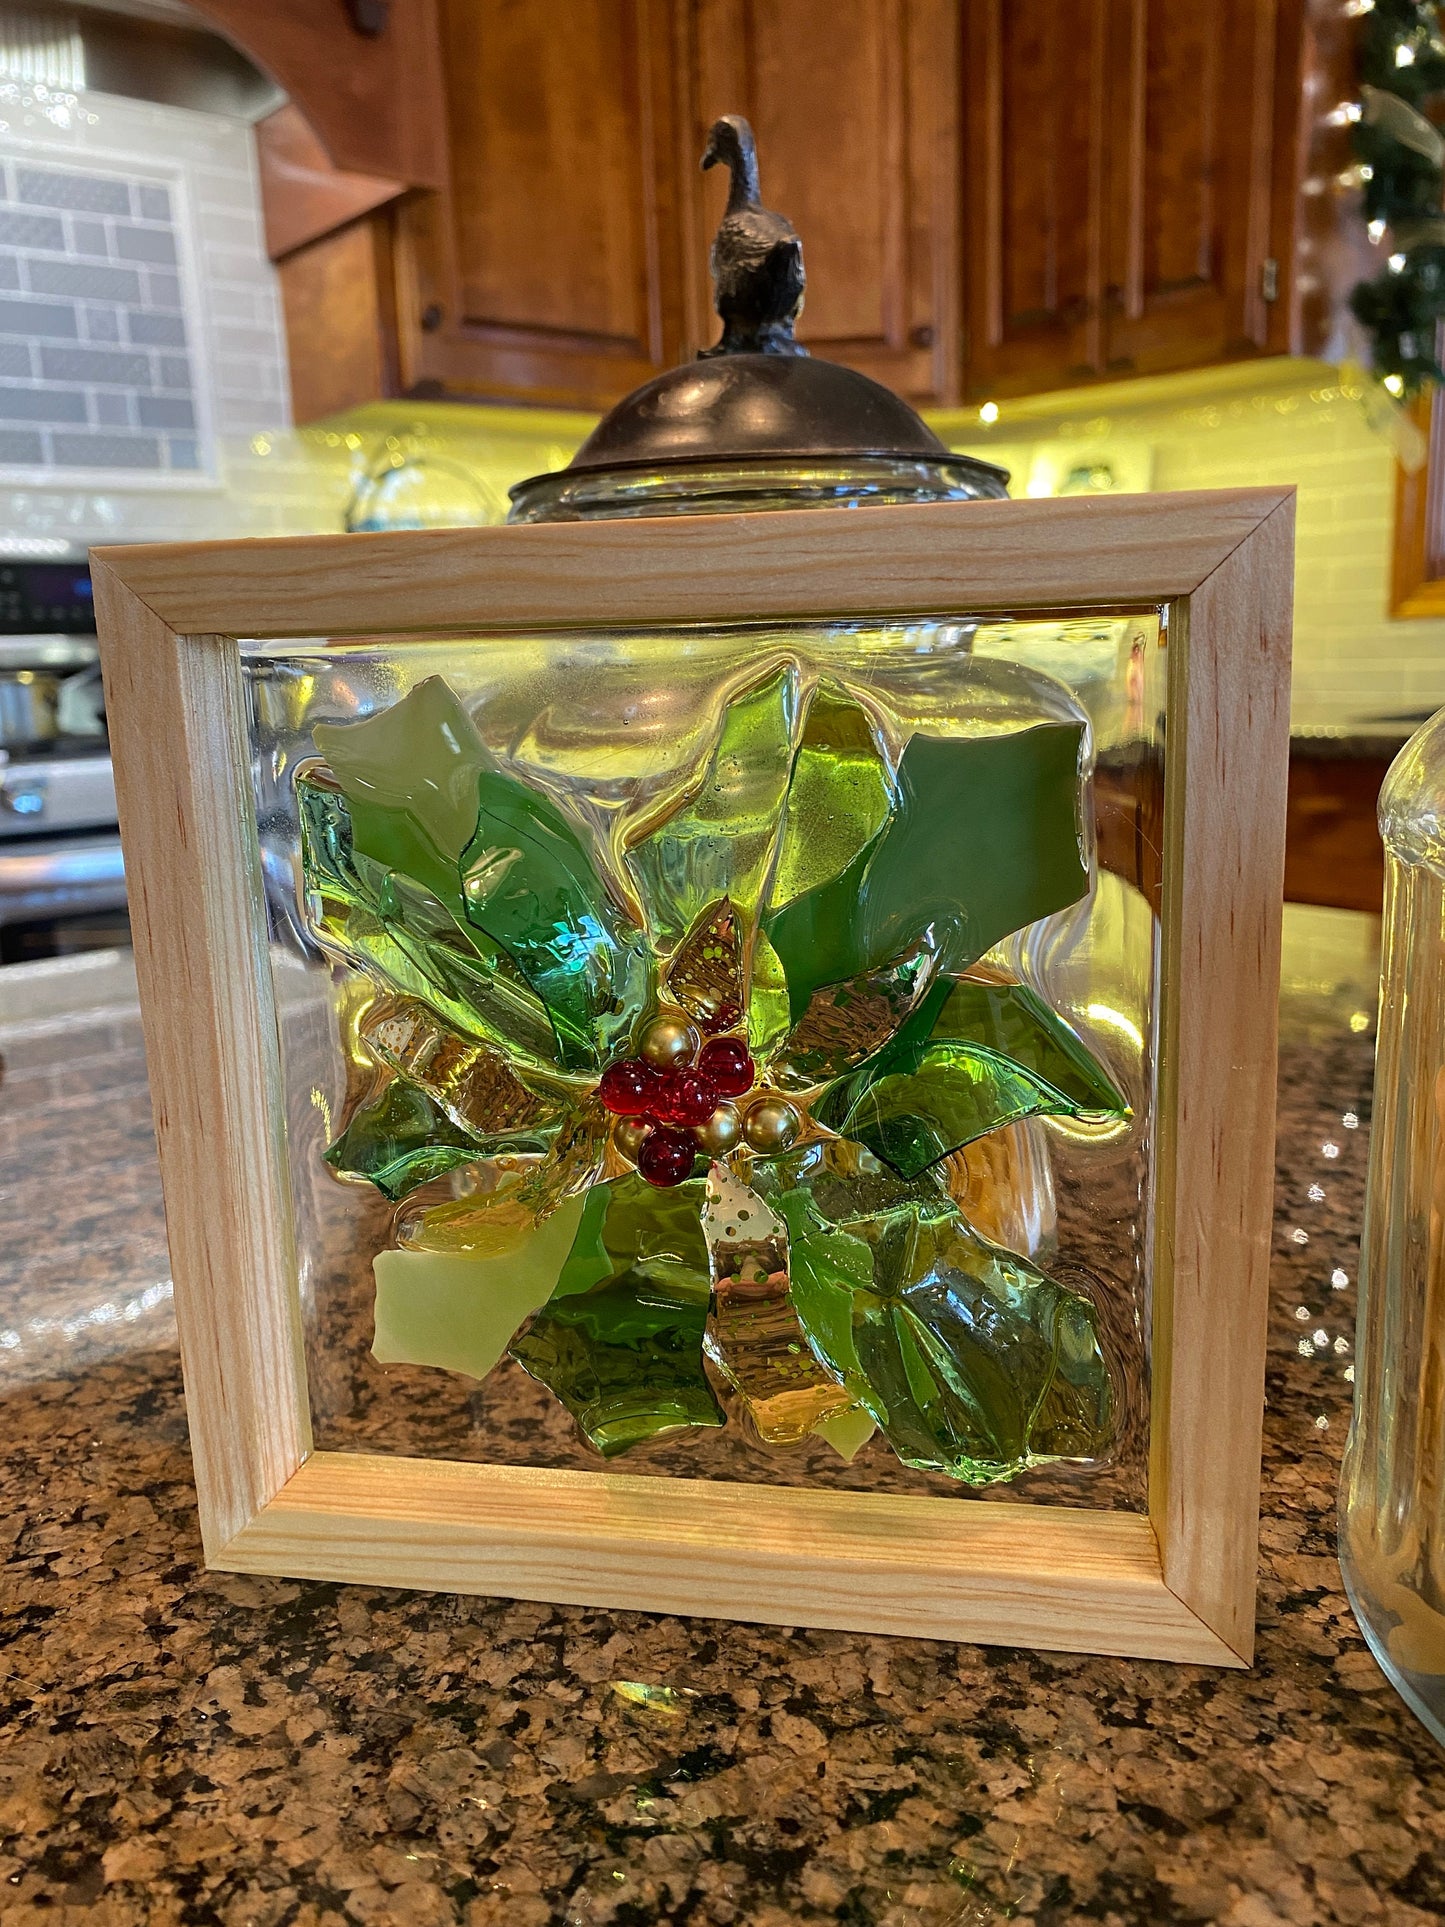 Holly Frame, Holly and Berries Decor, Recycled Glass and Resin Art, Christmas Mantel Decor, Kitchen Holly Decor, Shelf Sitter, Wreath Decor